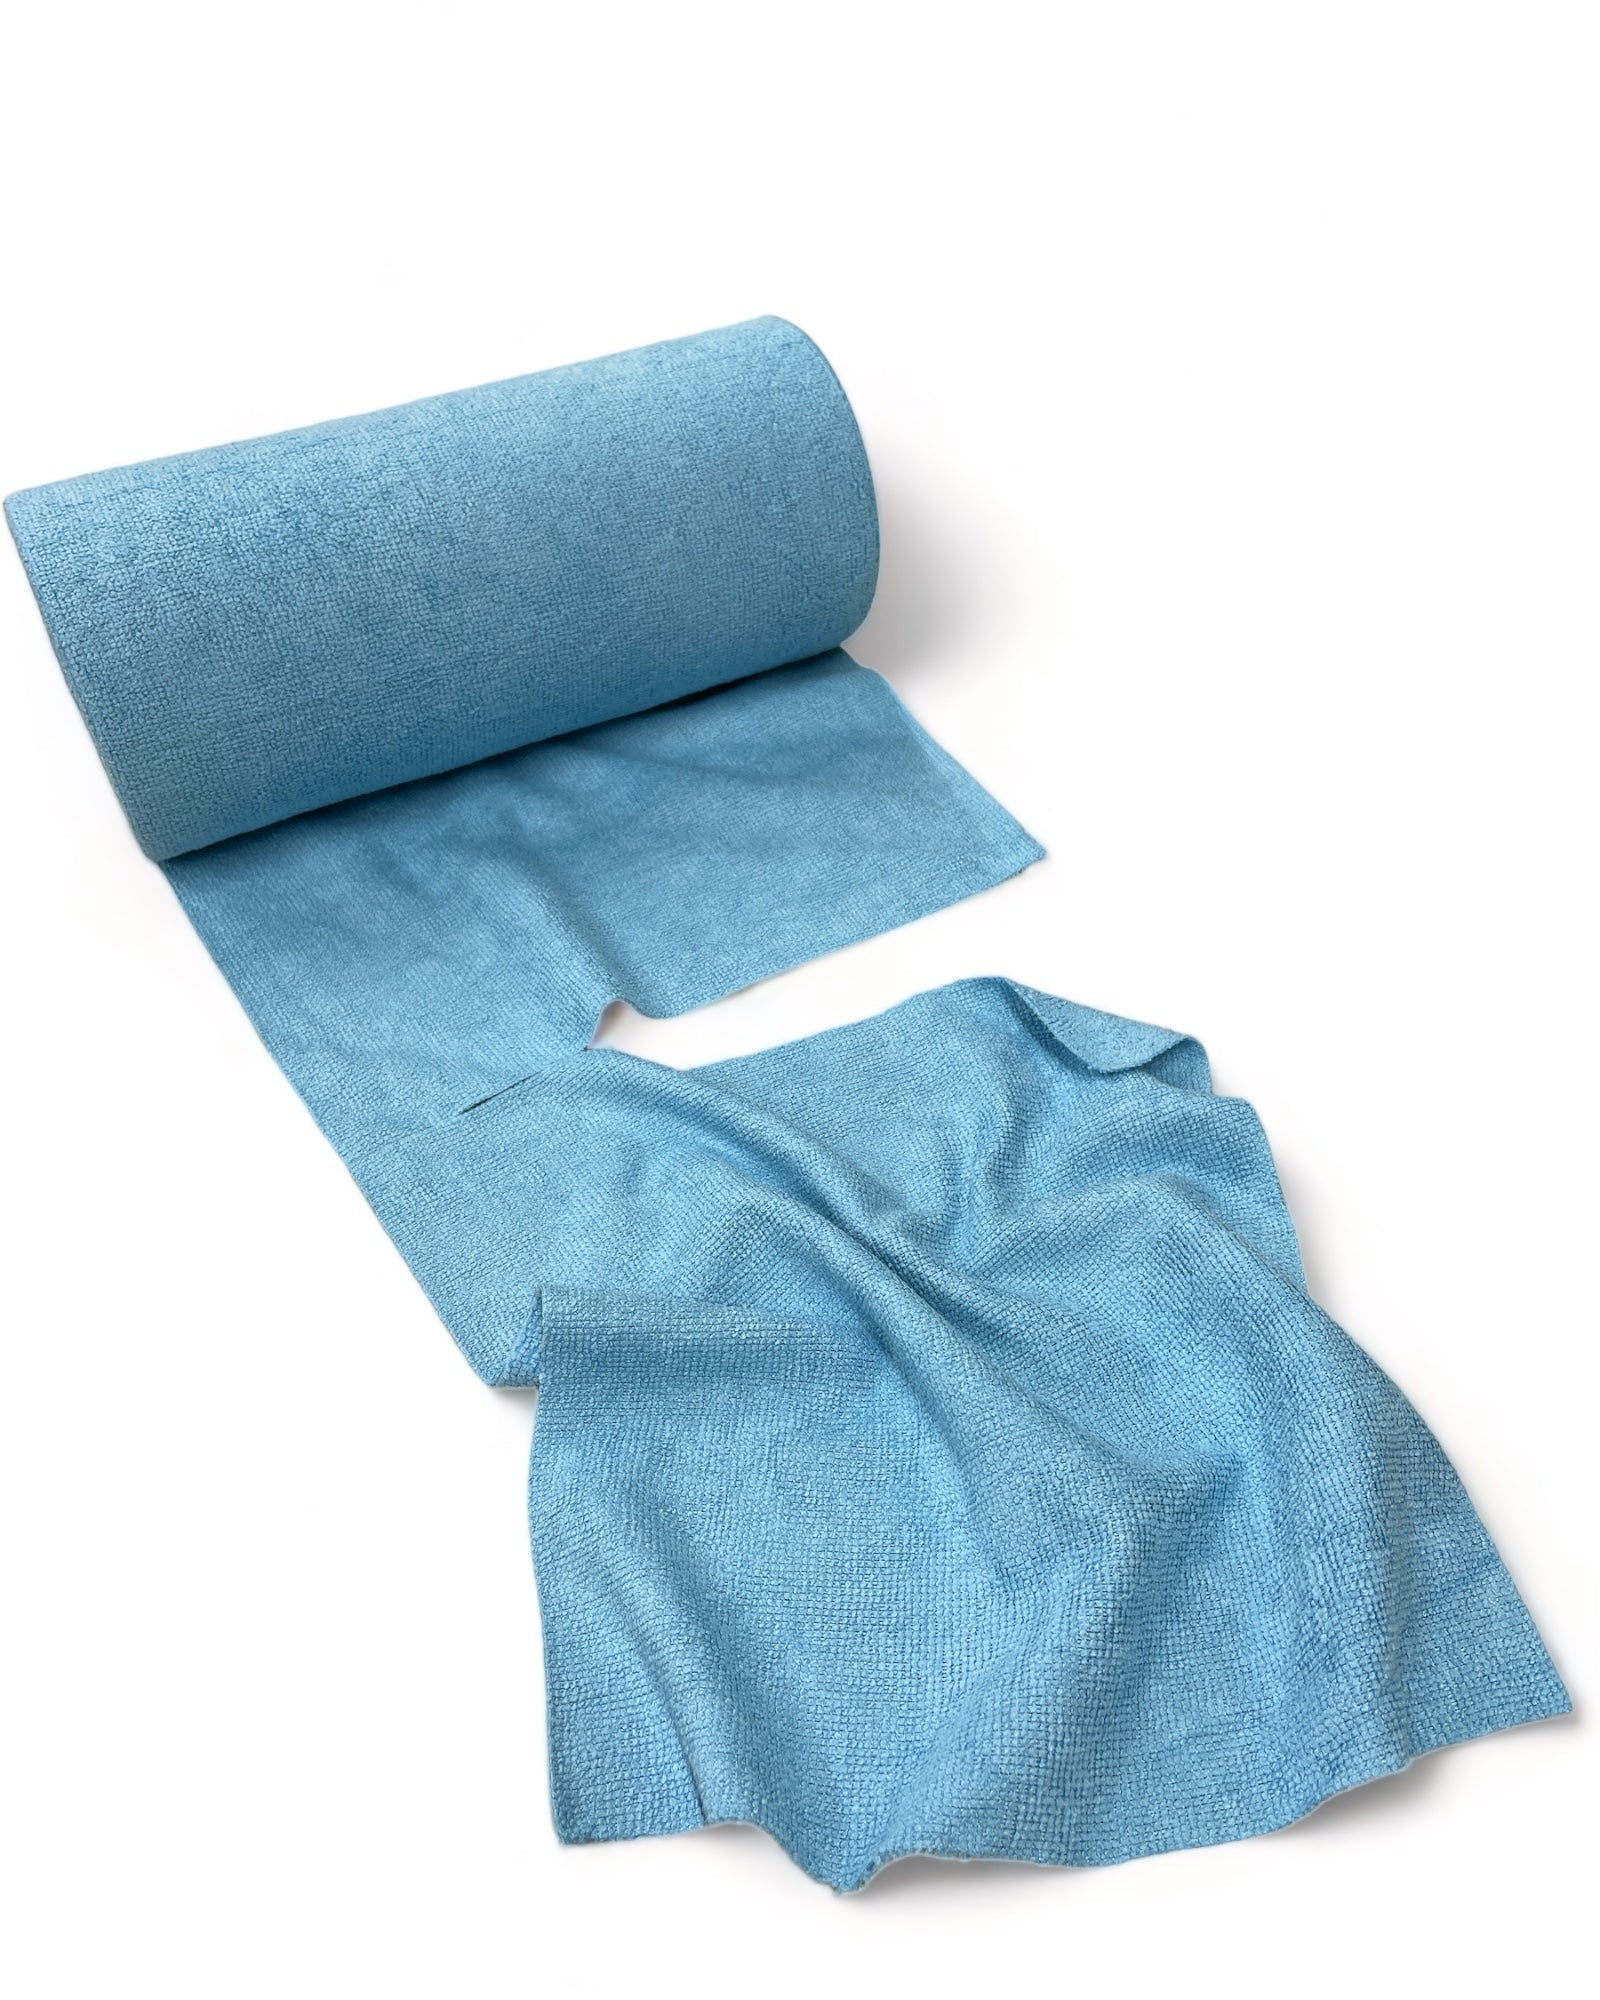 Packaged roll of blue microfiber cleaning cloths